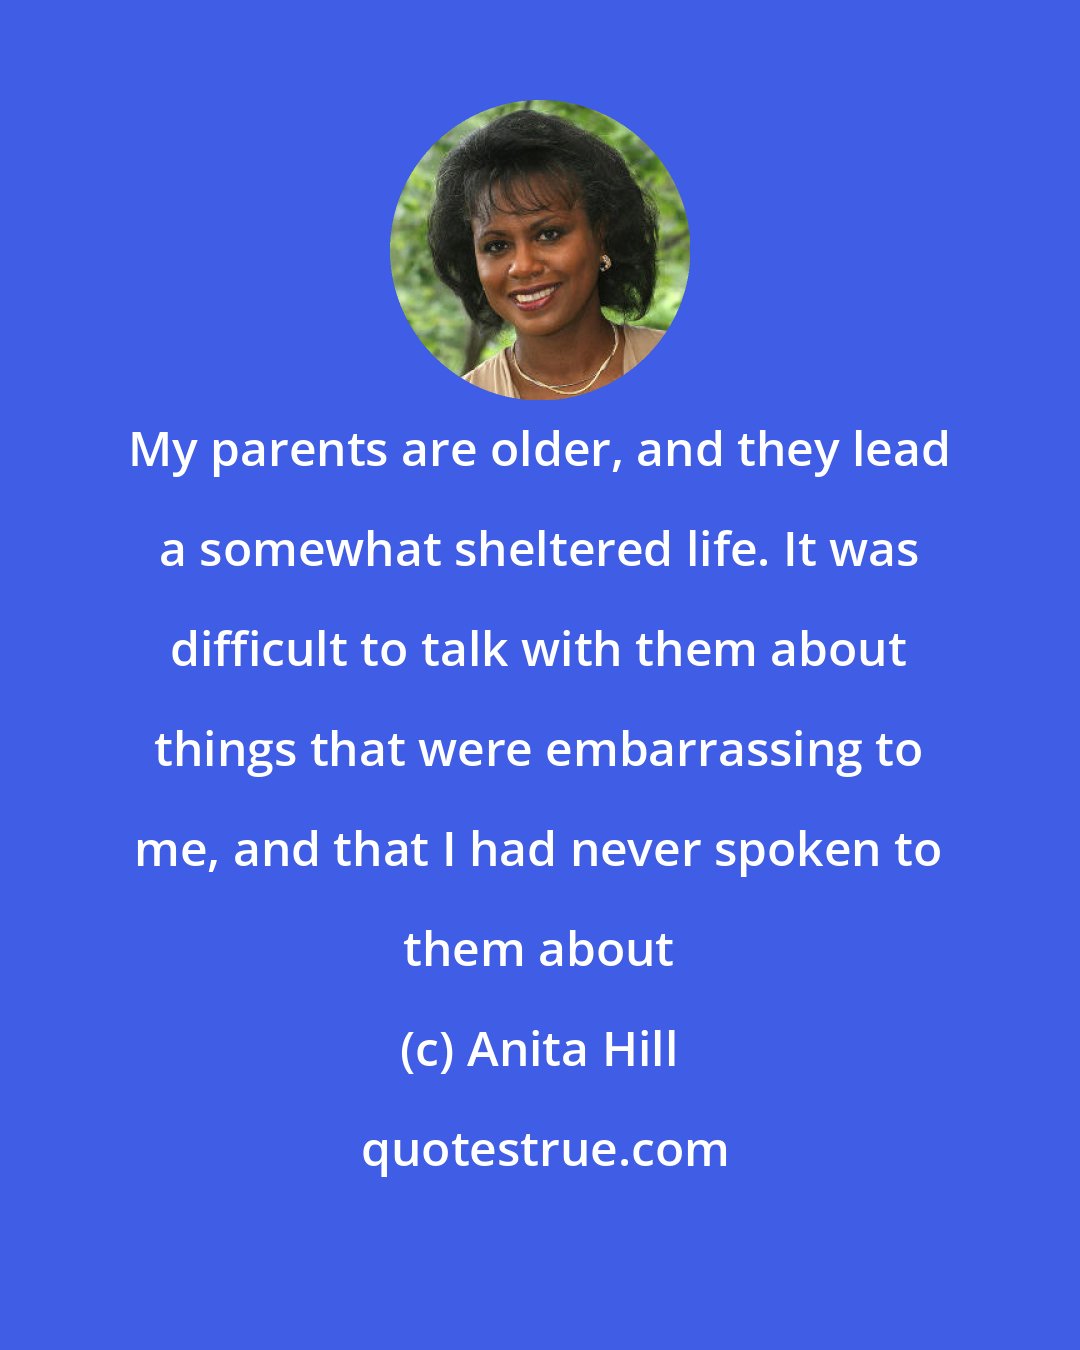 Anita Hill: My parents are older, and they lead a somewhat sheltered life. It was difficult to talk with them about things that were embarrassing to me, and that I had never spoken to them about